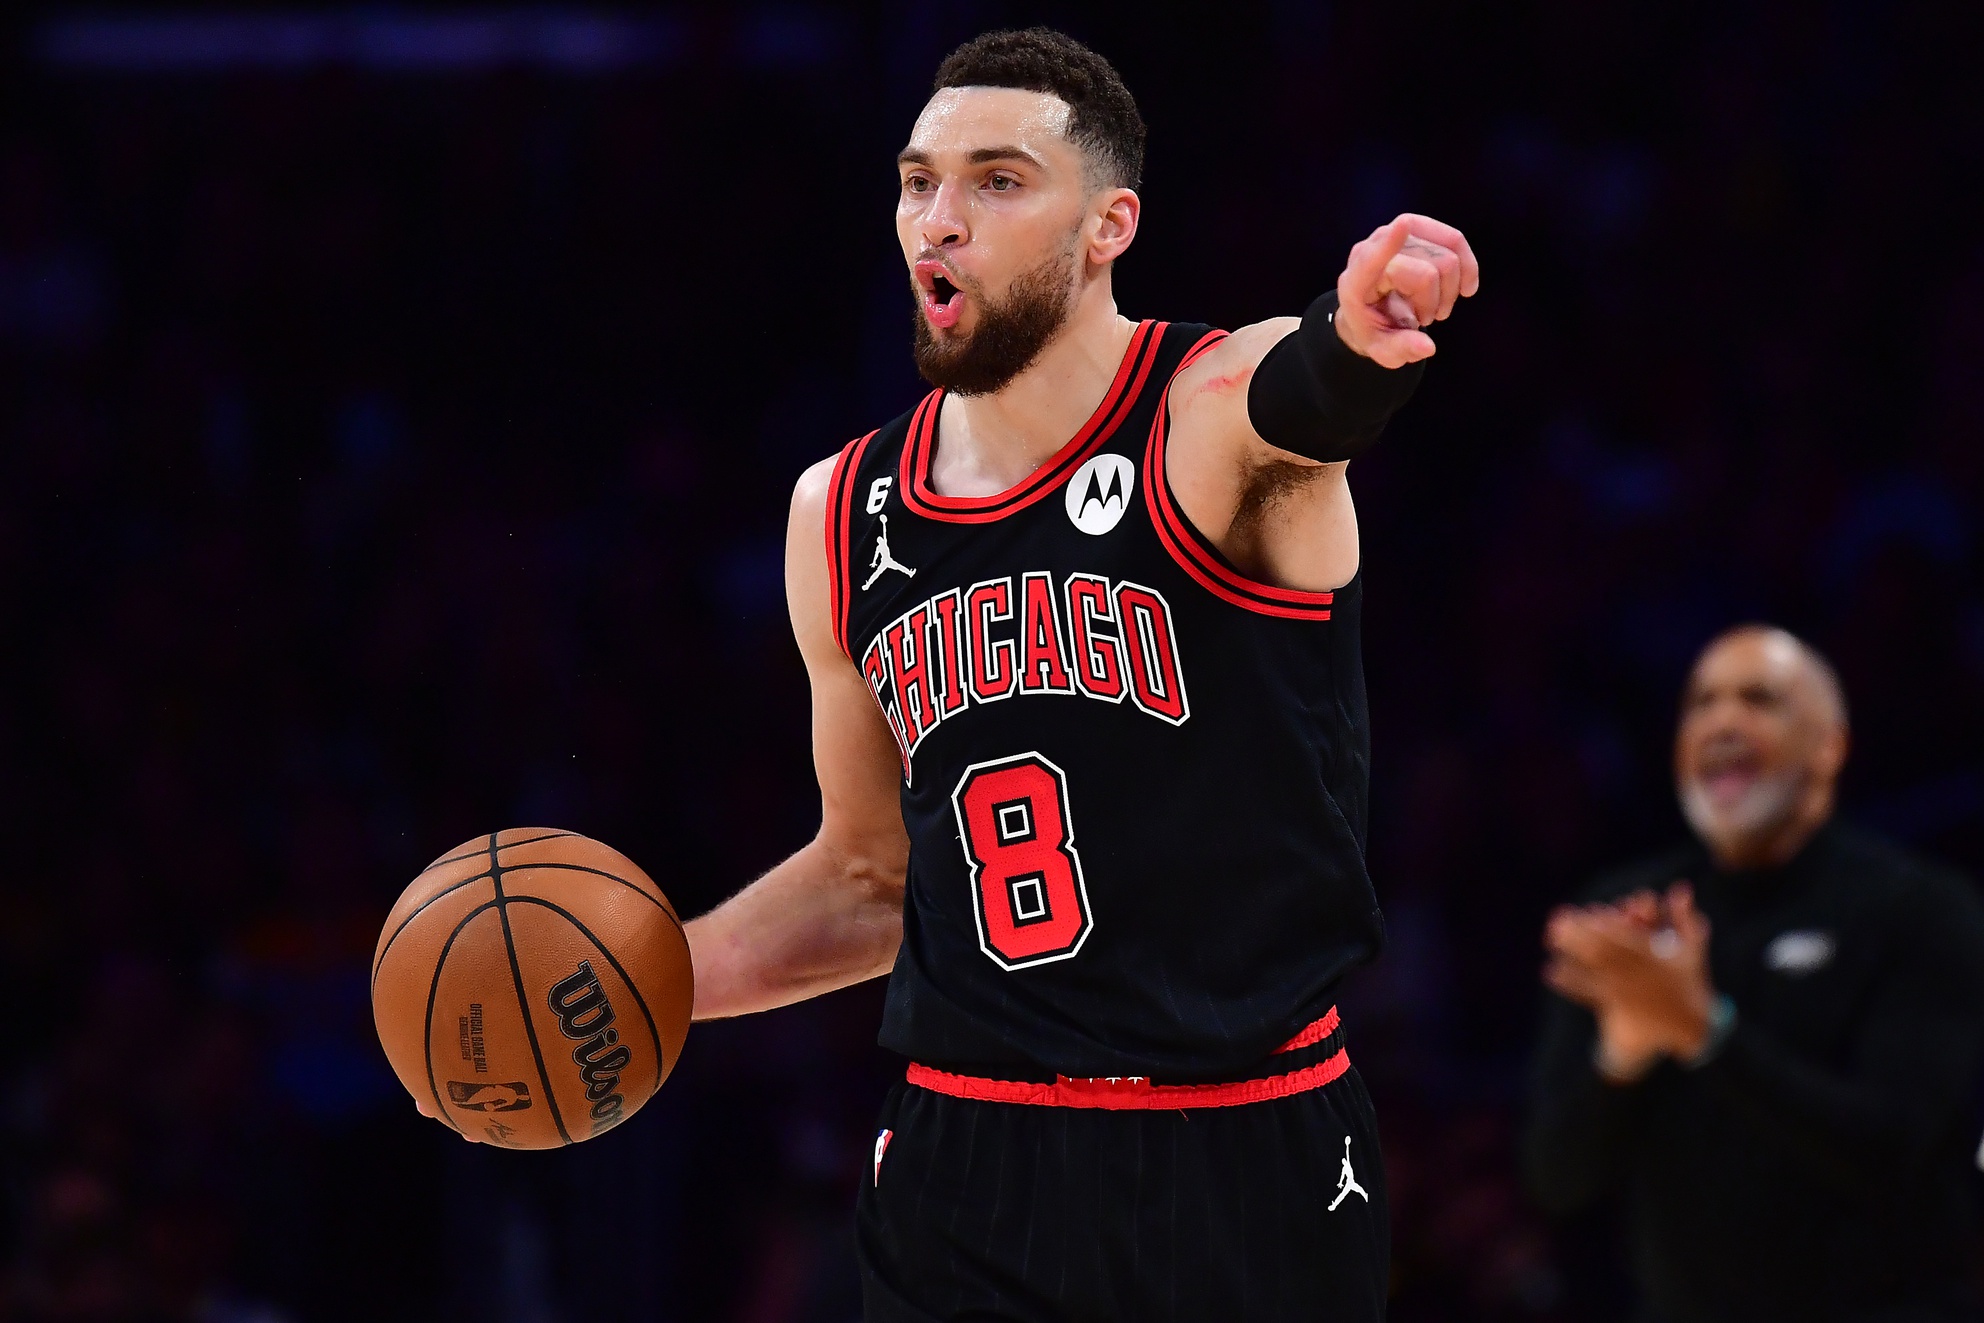 Mar 26, 2023; Los Angeles, California, USA; Chicago Bulls guard Zach LaVine (8) controls the ball against the Los Angeles Lakers during the second half at Crypto.com Arena. Mandatory Credit: Gary A. Vasquez-USA TODAY Sports